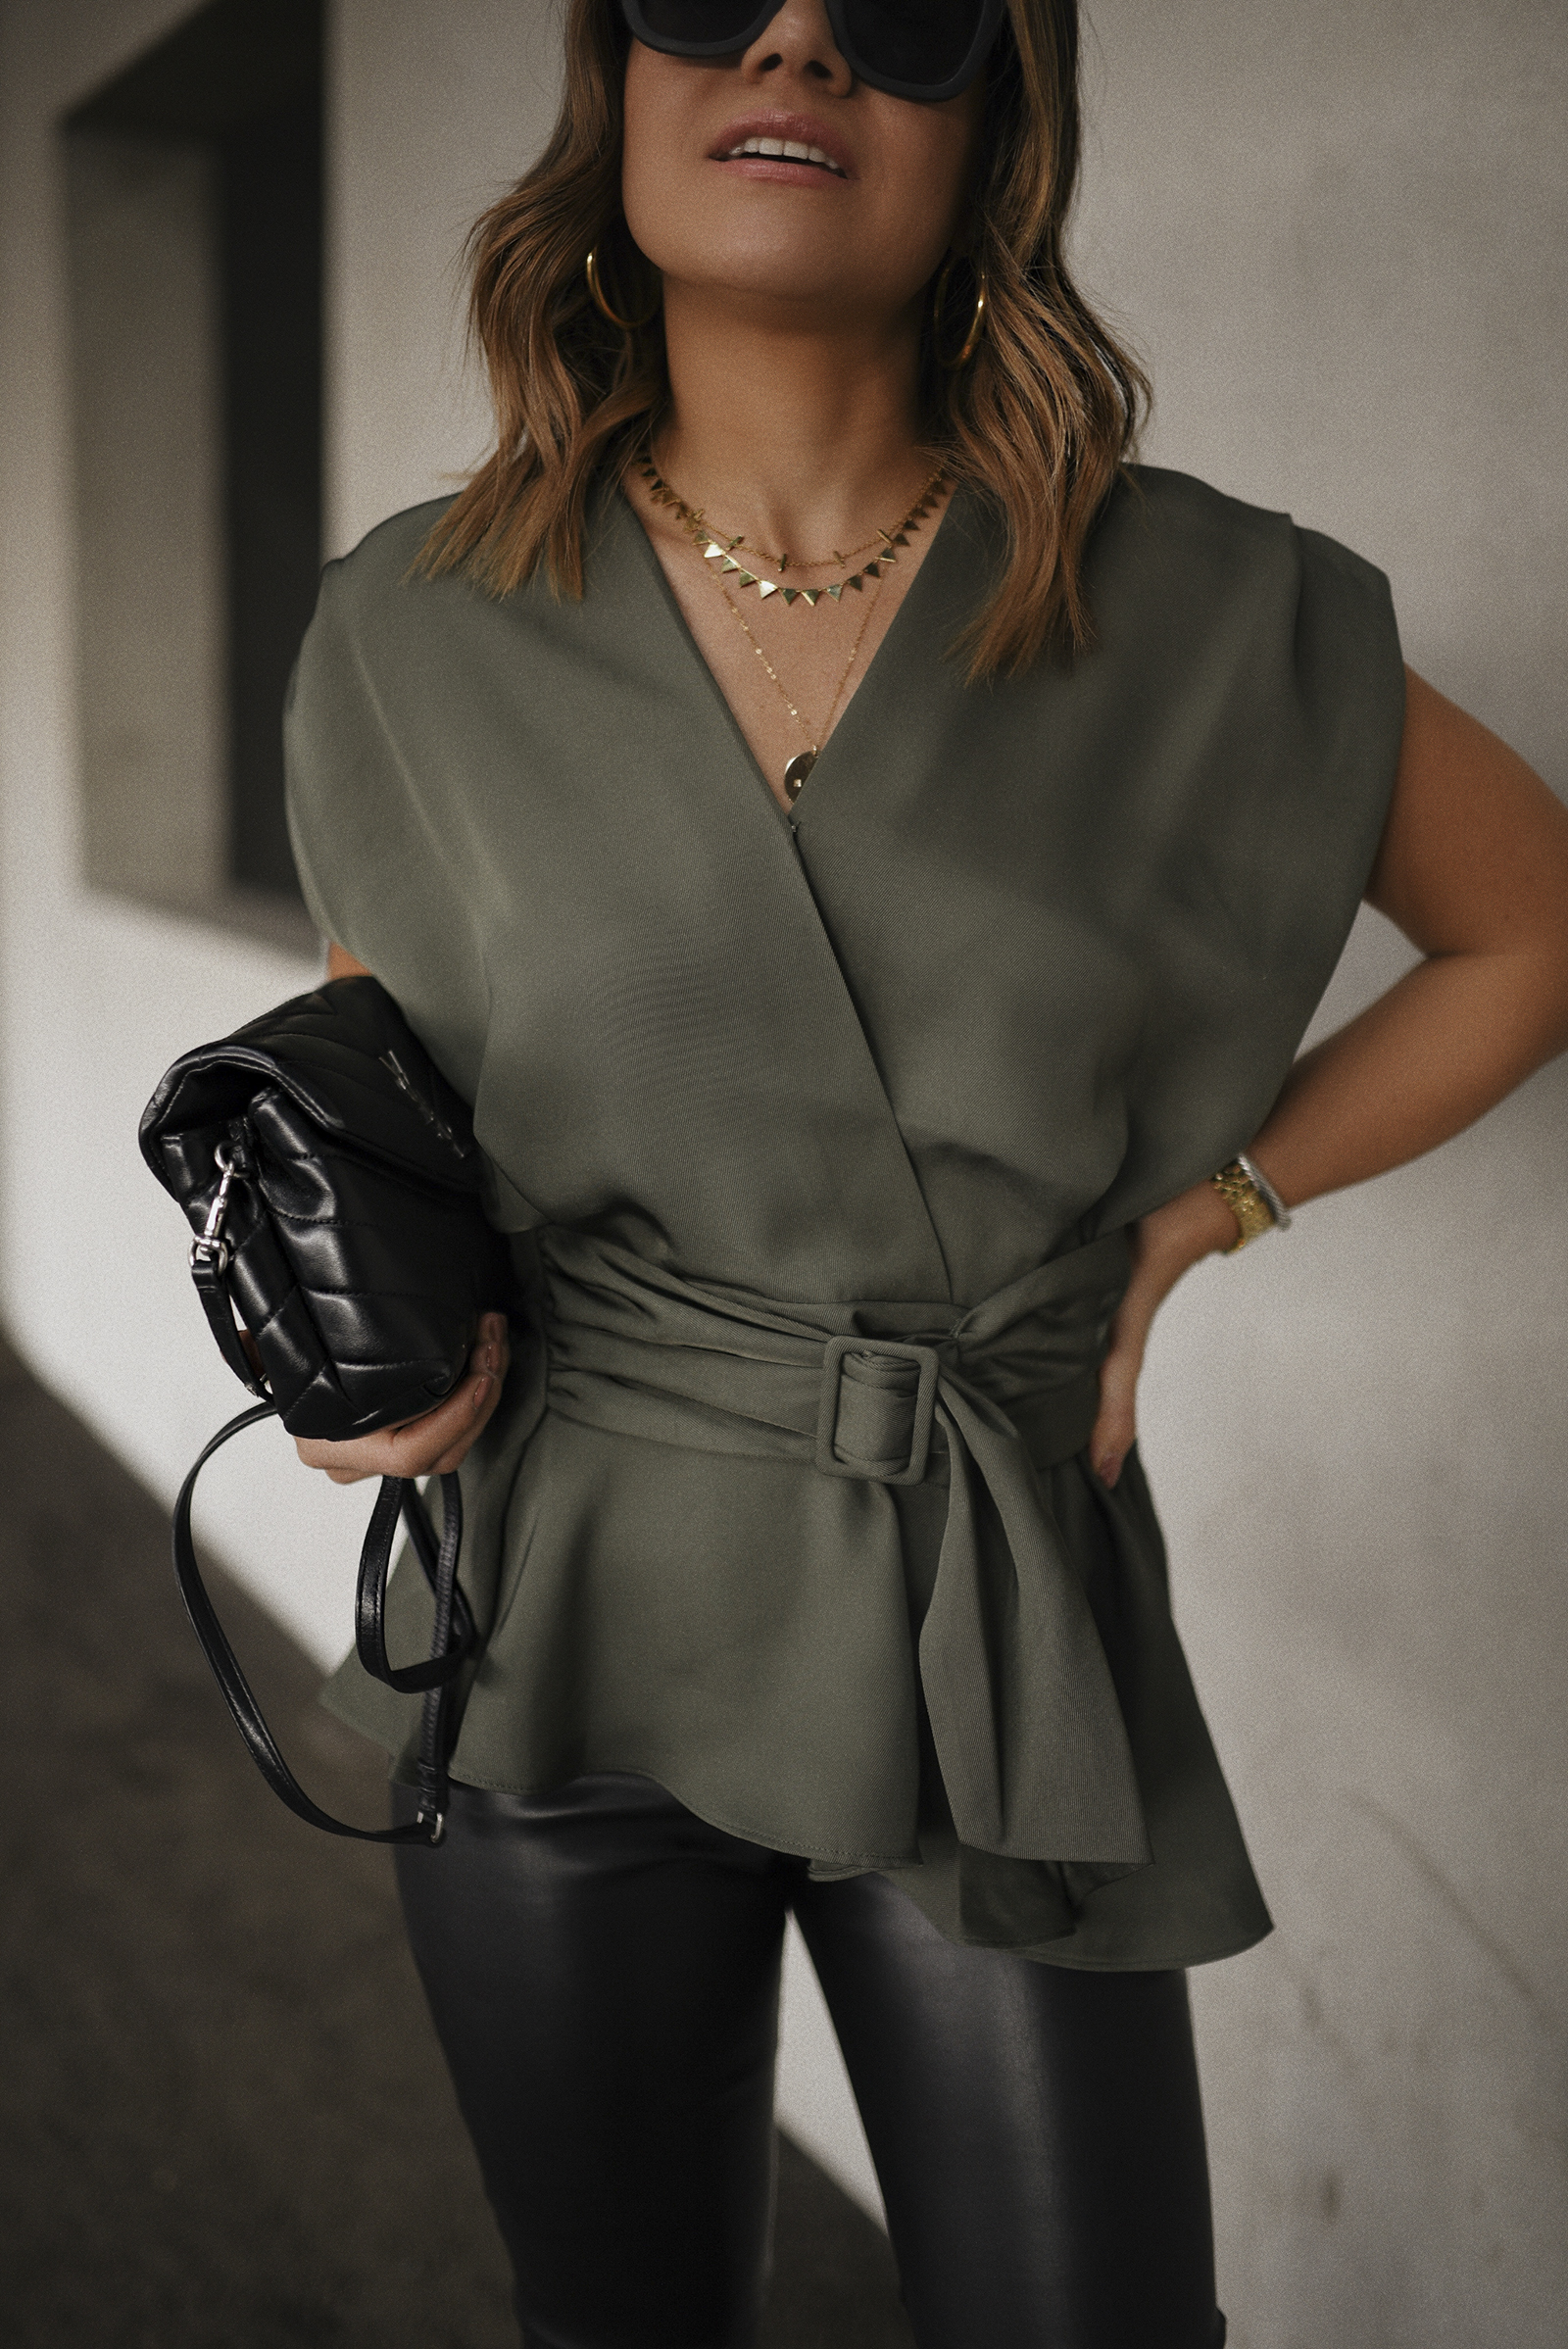 Carolina Hellal of Chic Talk wearing an Express wrap top, Sofia Jeans Faux leather pants, Lafayette148 black booties and a YSL crossbody bag. 